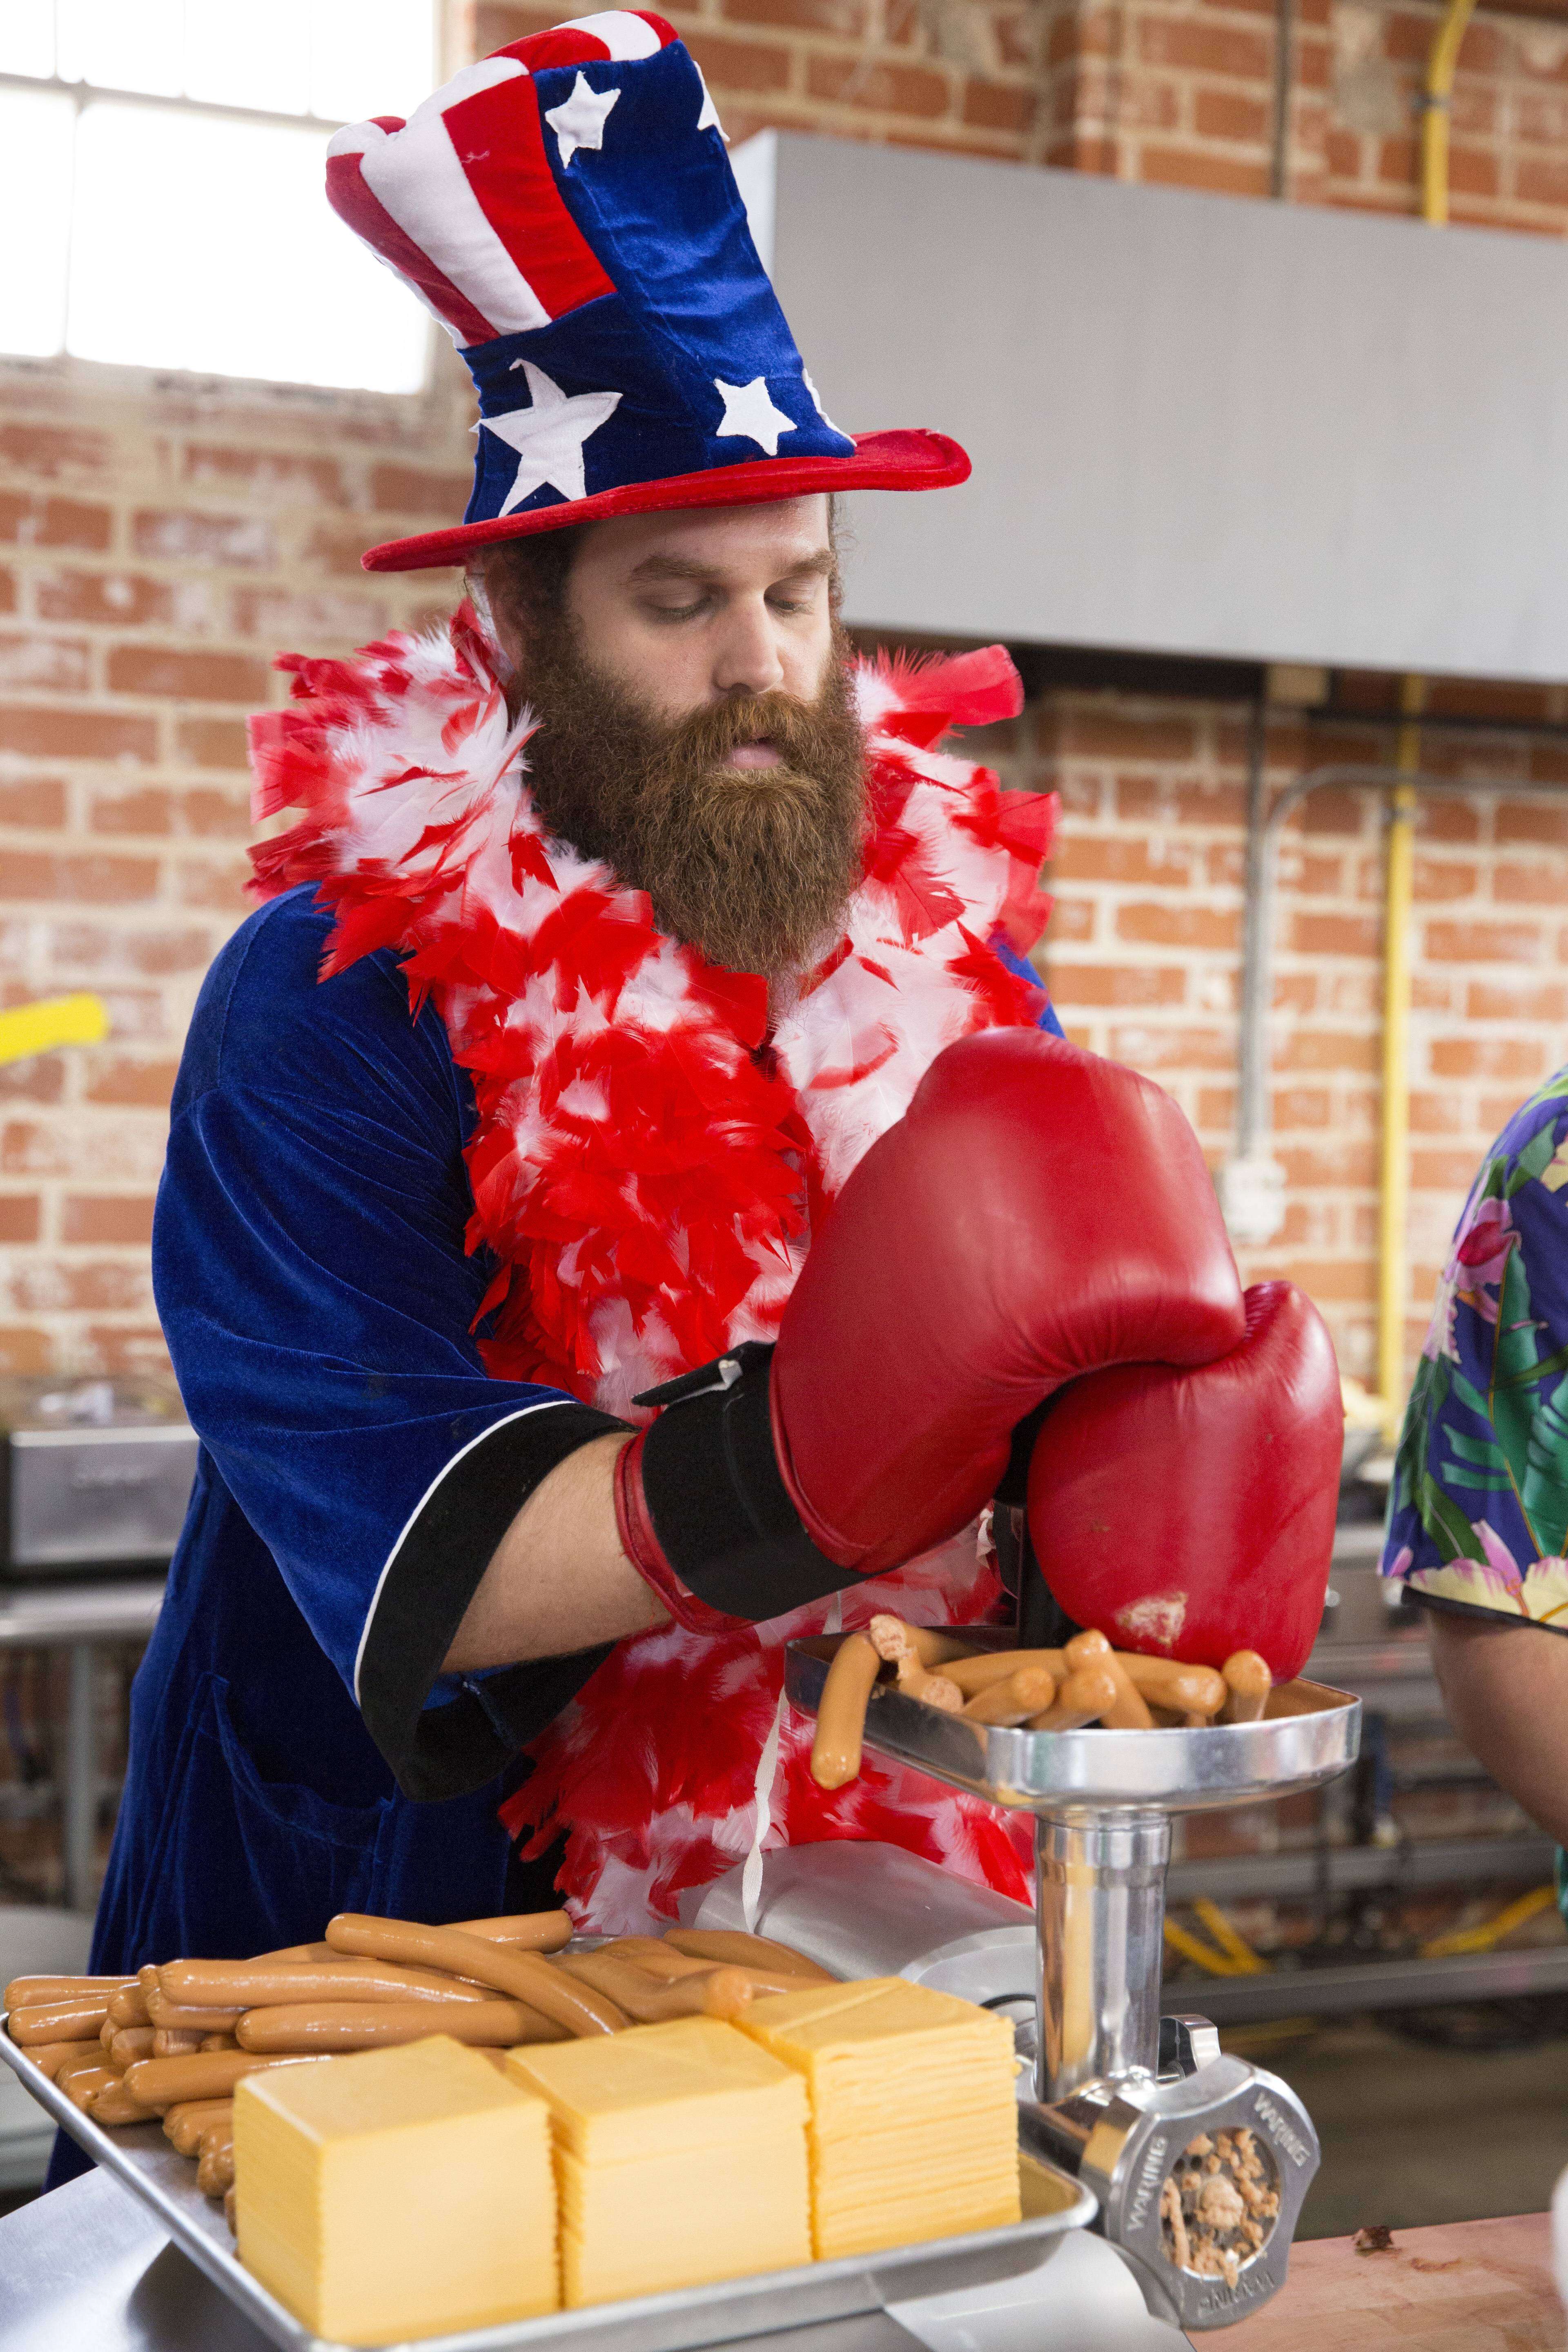 Epic Meal Time America burger